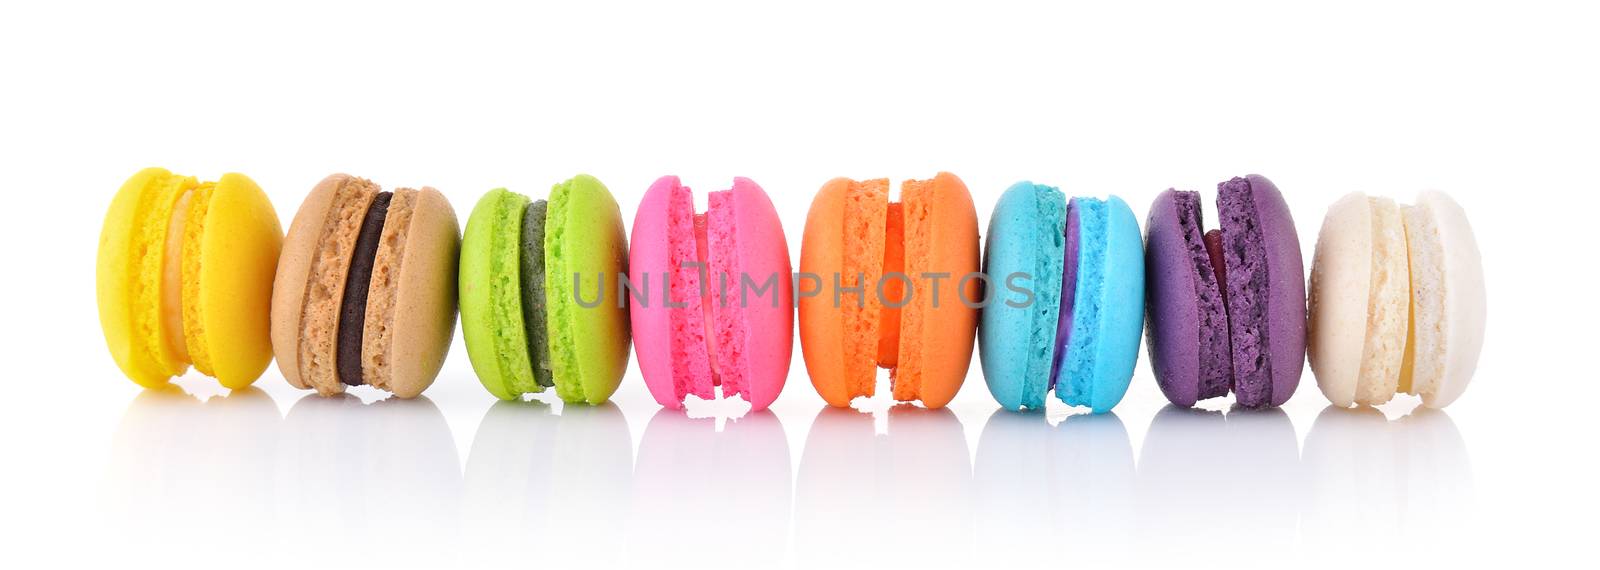 colourful french macaroons or macaron on white background by sommai